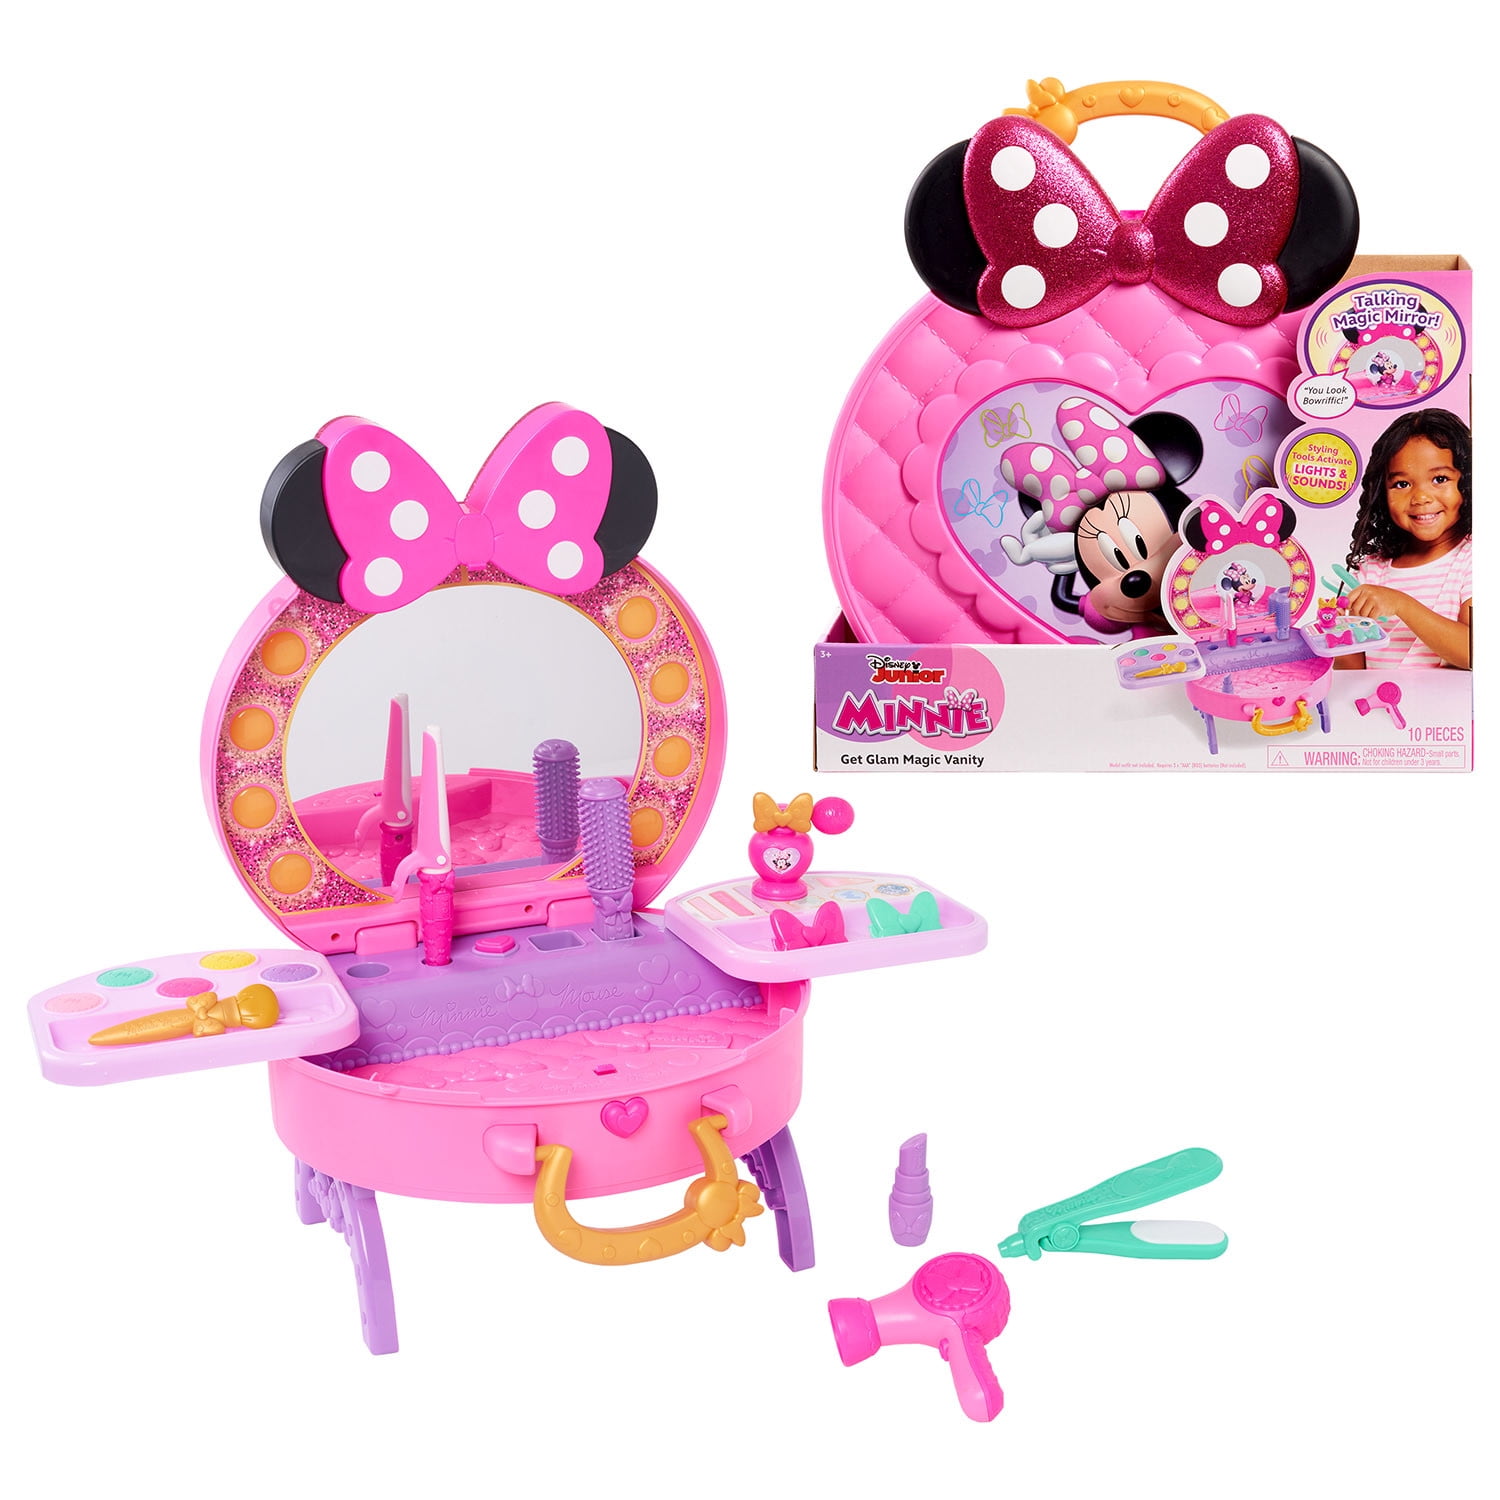 Disney Junior Minnie Mouse Get Glam Magic Table Top Pretend Play Vanity with Lights and Sounds, Officially Licensed Kids Toys for Ages 5 Up, Gifts and Presents